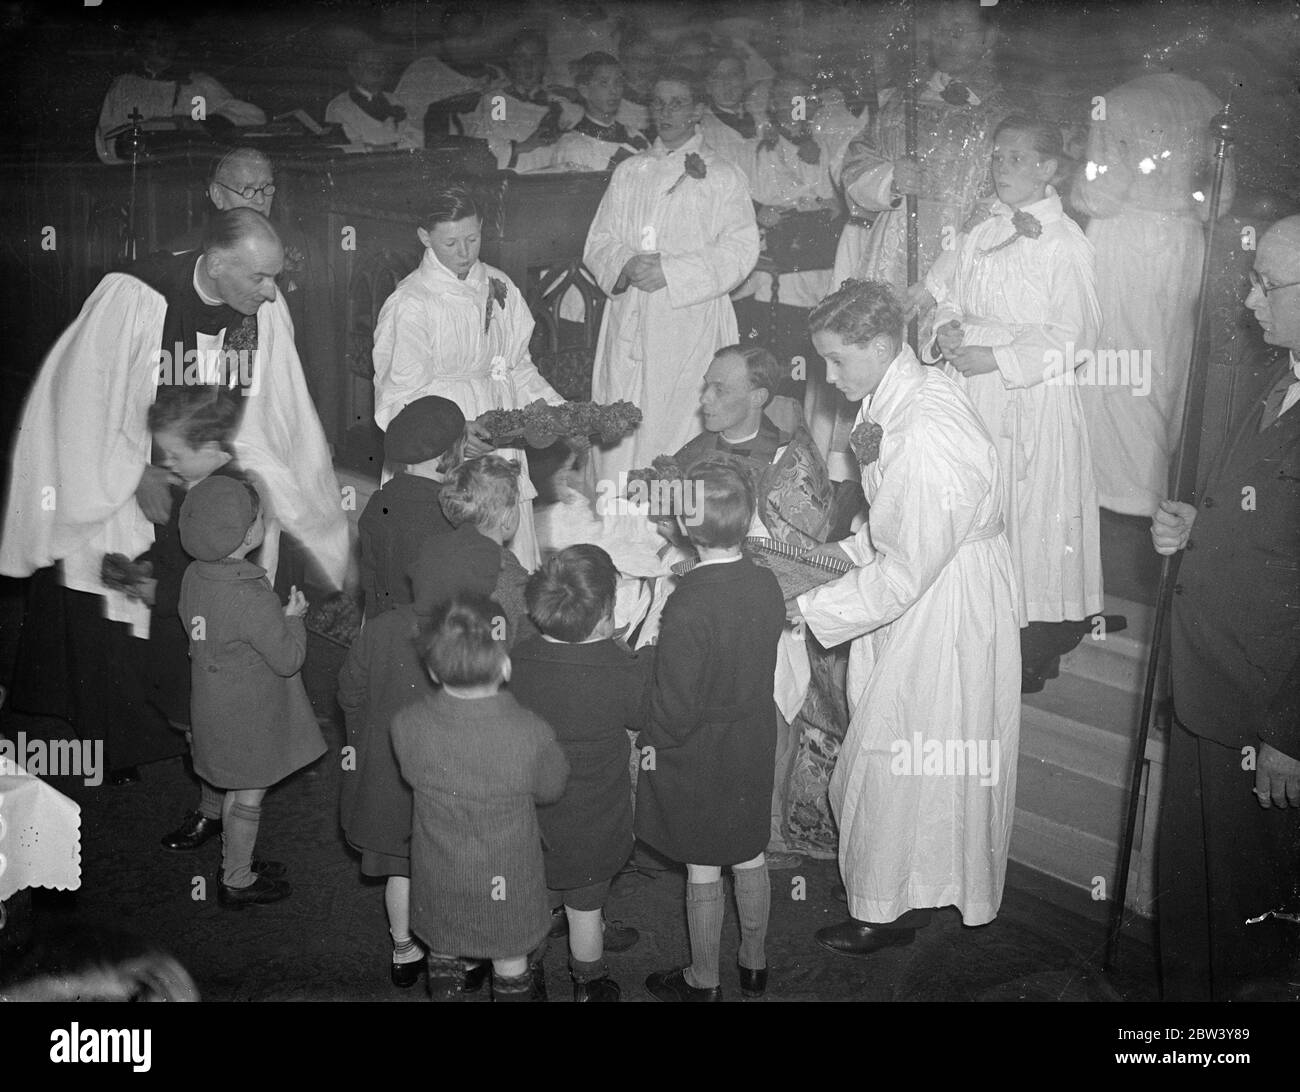 Children present violets to mothers at ' Mothering Sunday ' service . Gifts of violets and traditional simnel cake were given by children to their mothers at the annual ' Mothering Sunday ' service at St Mark ' s Church , Notting Hill . The violets were handed to the children by the Vicar , the Rev B G Chandler , and they in in turn presented them to their mothers . Photo shows , the vicar , Rev B G Chandler handing the violets to the children at the altar rails . 7 March 1947 Stock Photo